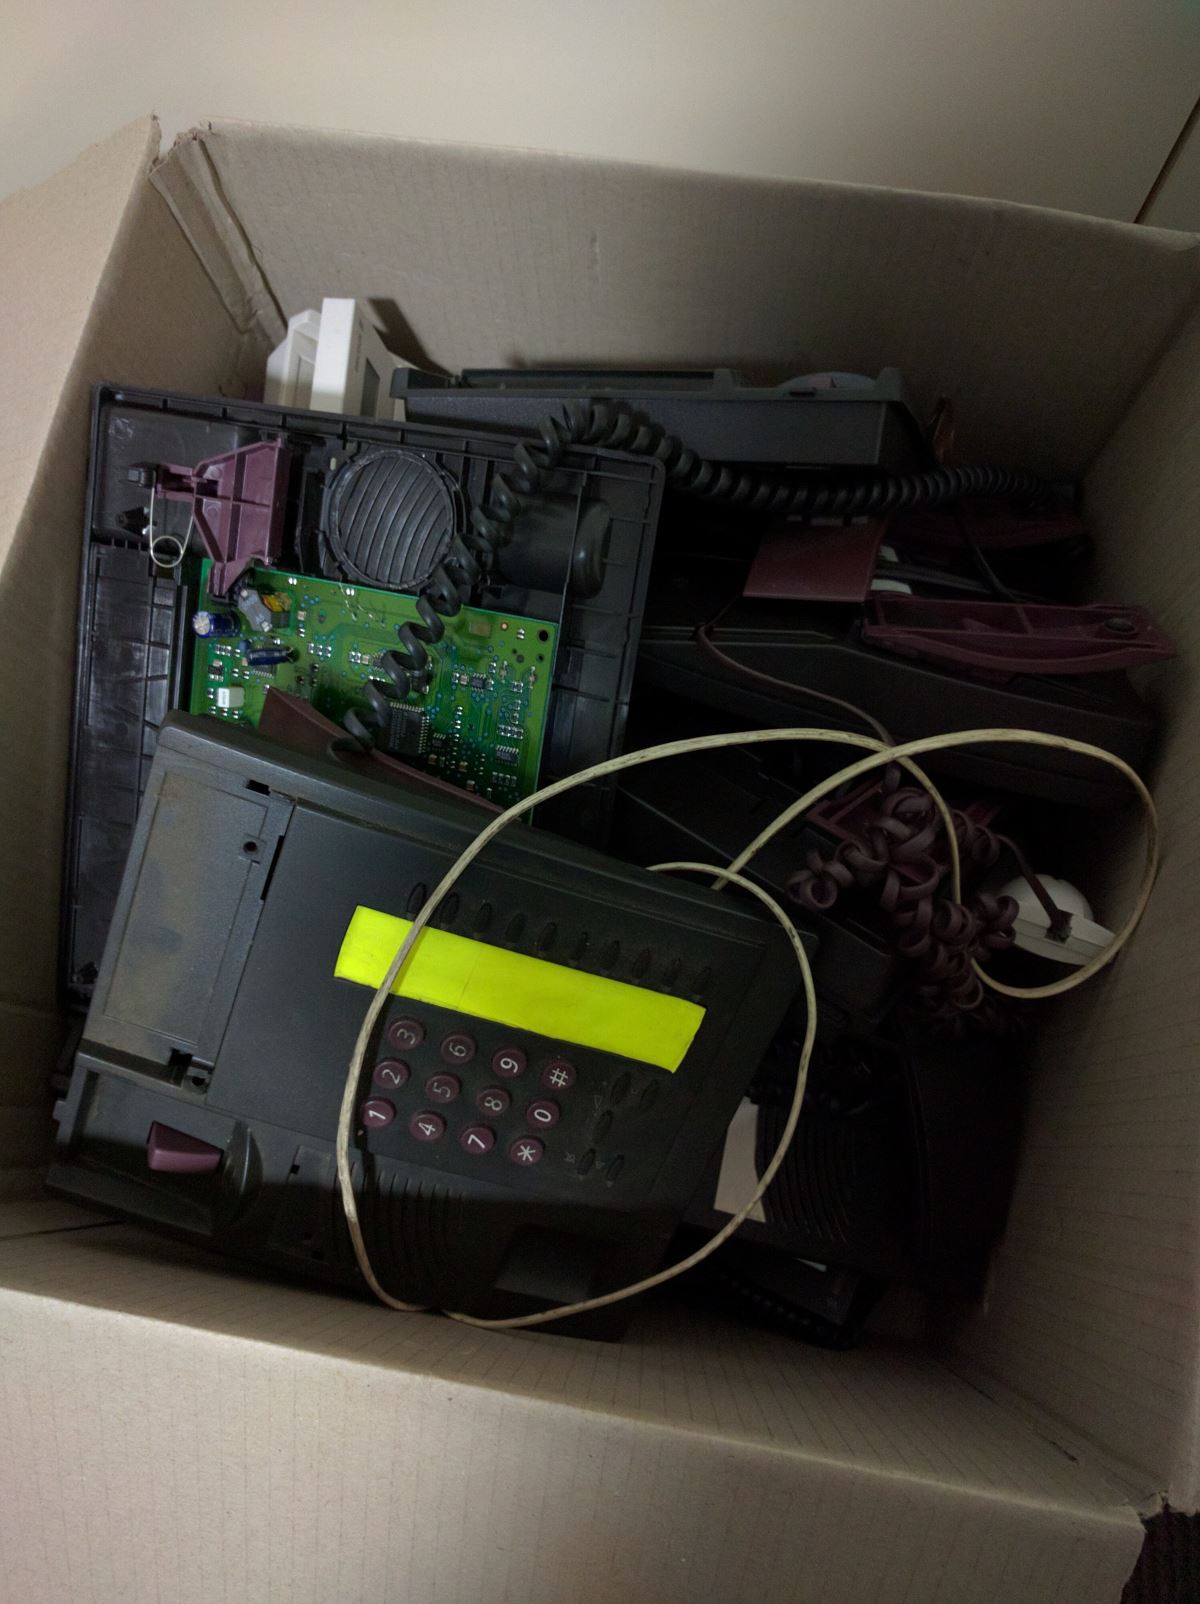 A cardboard box containing old phones with LCD screens